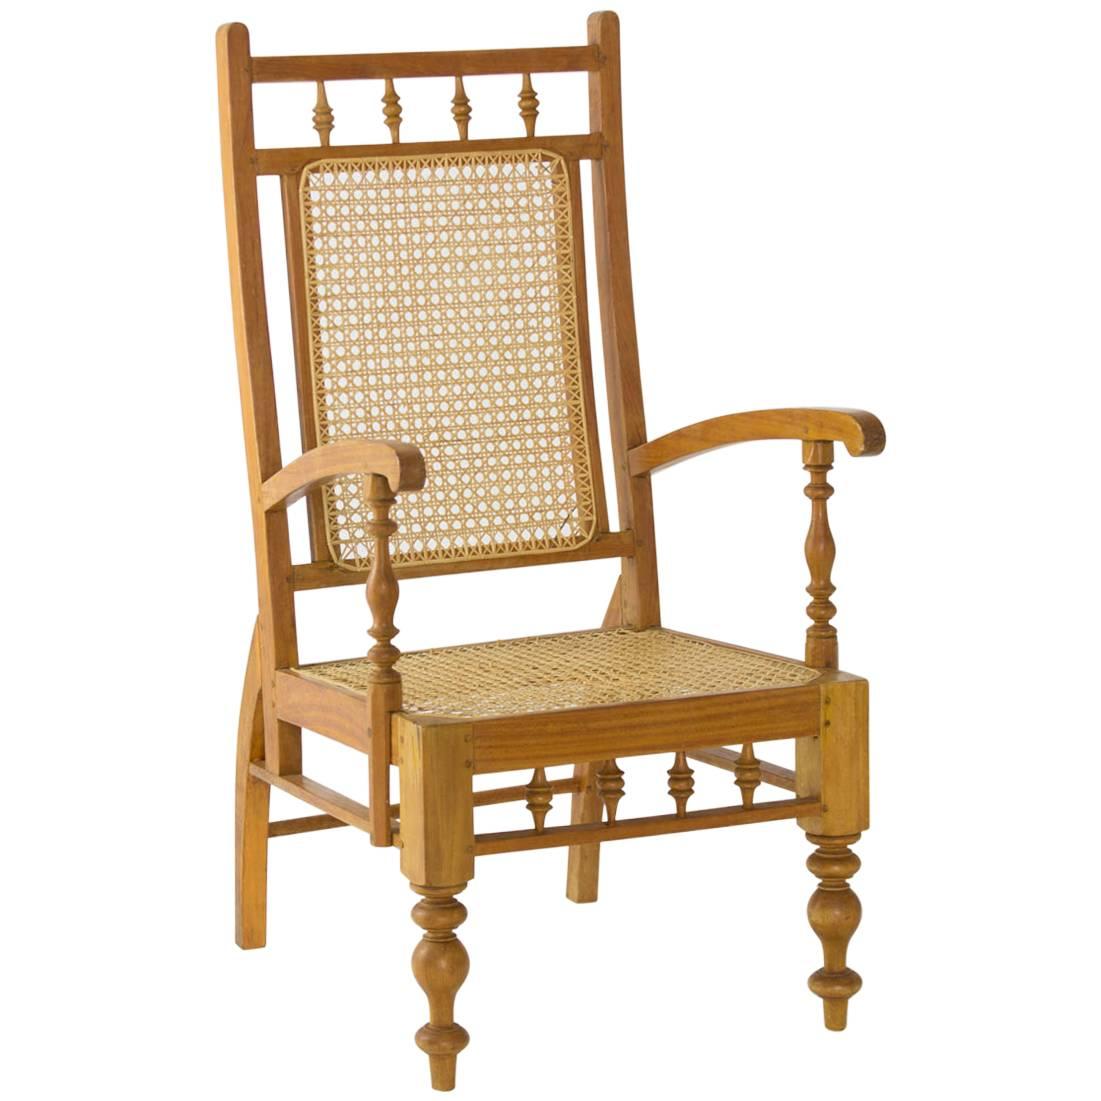 Early 20th Century Colonial Sri Lankan Satinwood Garden Chair